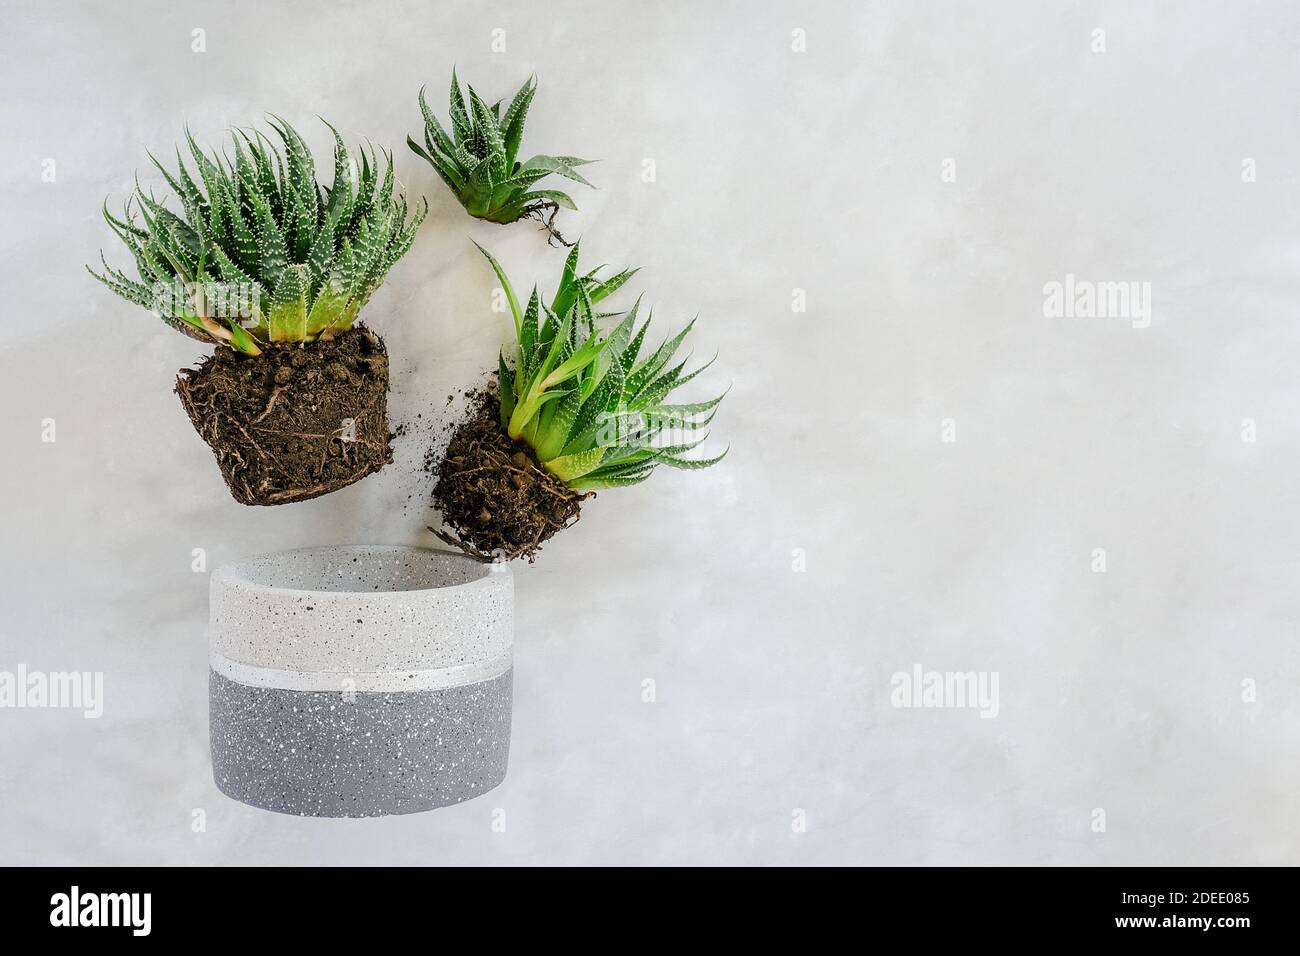 Transplanting indoor flowers and houseplant. Sprouts of green succulents and concrete pot on marble table. Concept floriculture or gardening. Top view Stock Photo